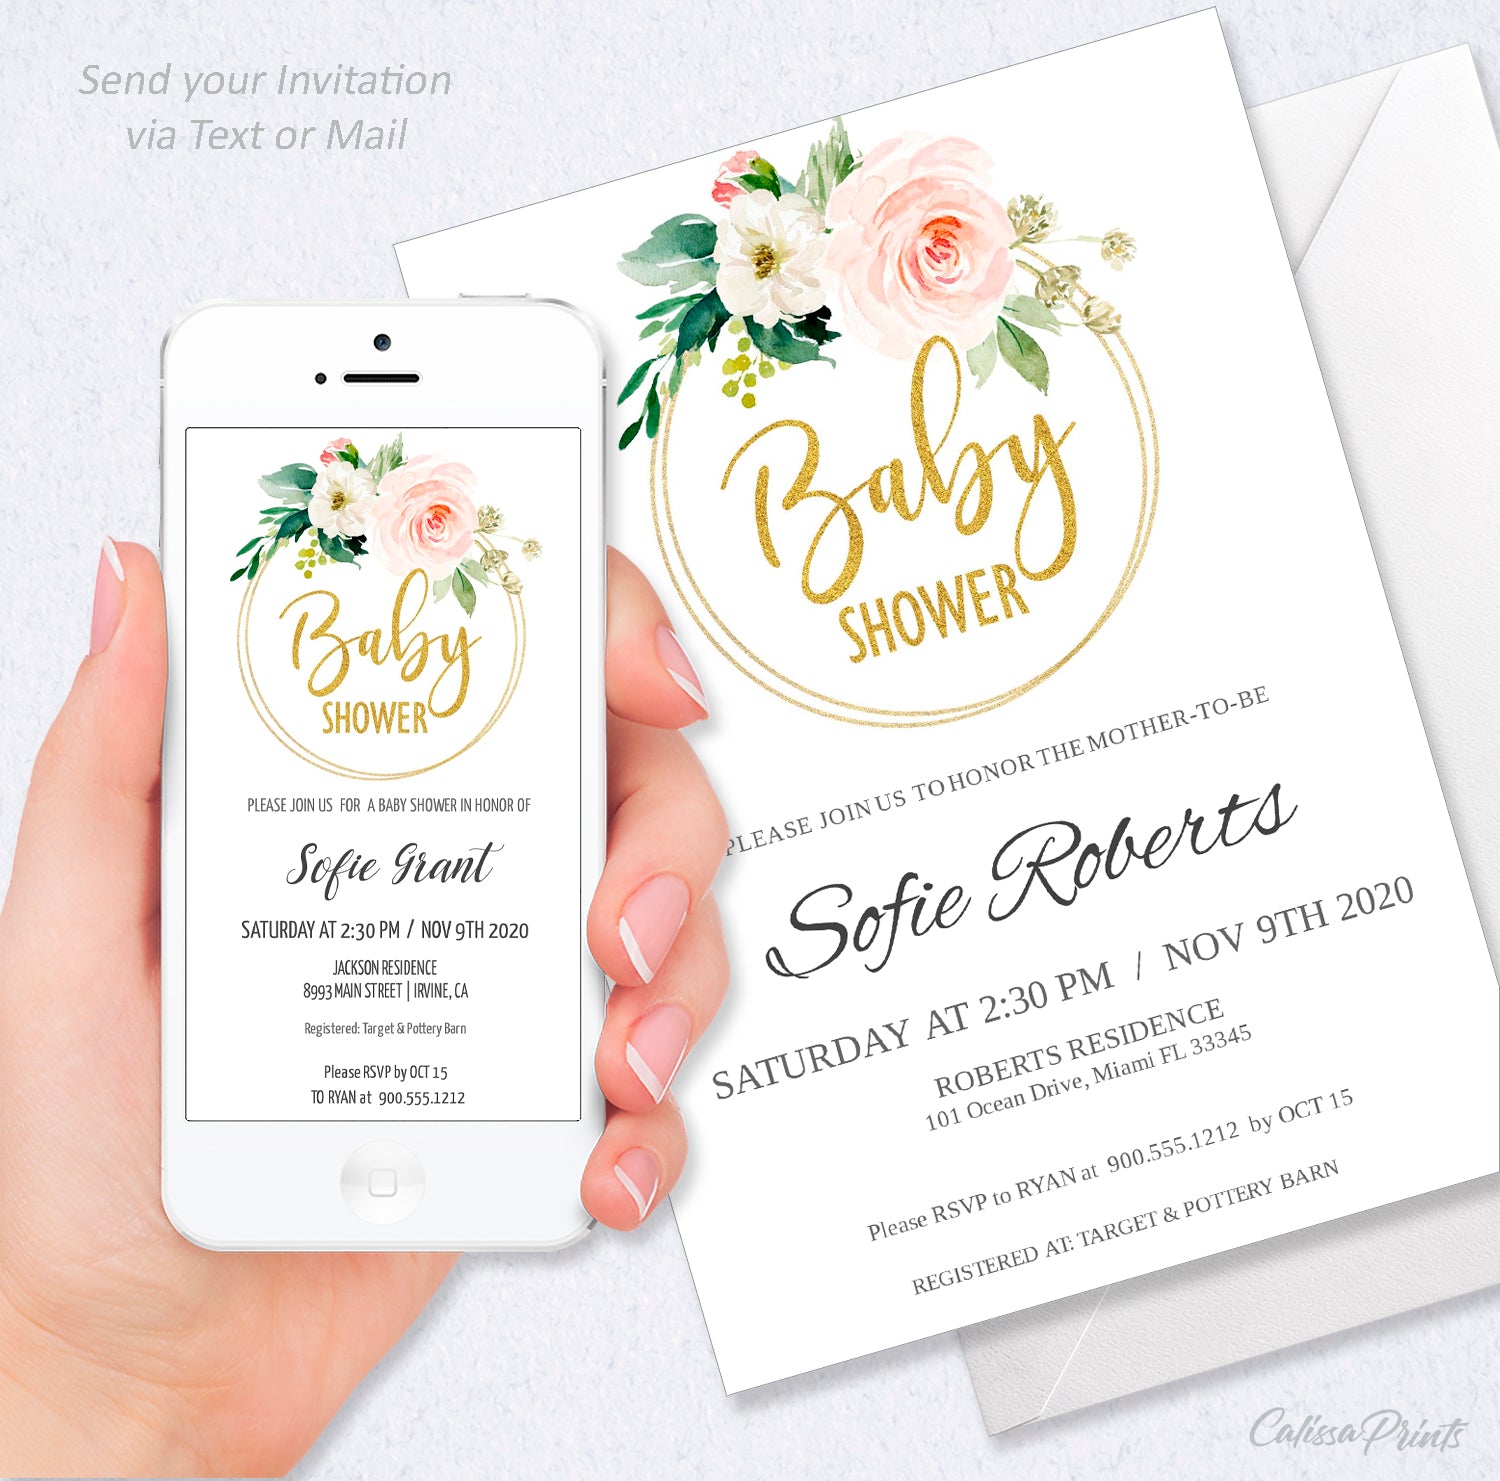 Baby Shower Party Invitation Editable Template Combo - Blush Pink Gold Design, BABY21 - CalissaPrints